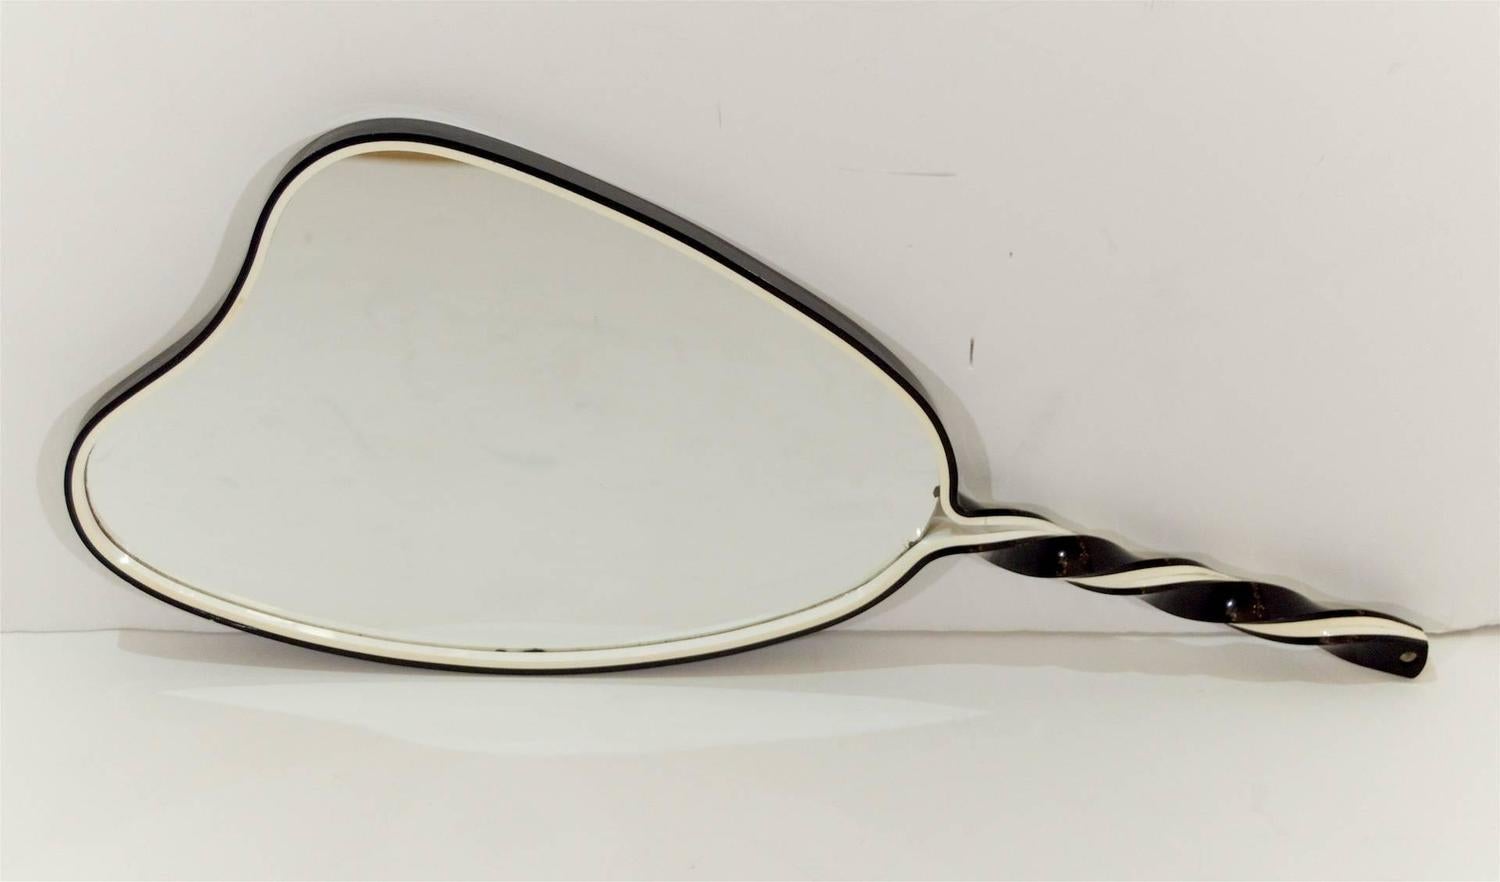 Organic Shaped Black and White Hand Mirror In Good Condition For Sale In Stamford, CT